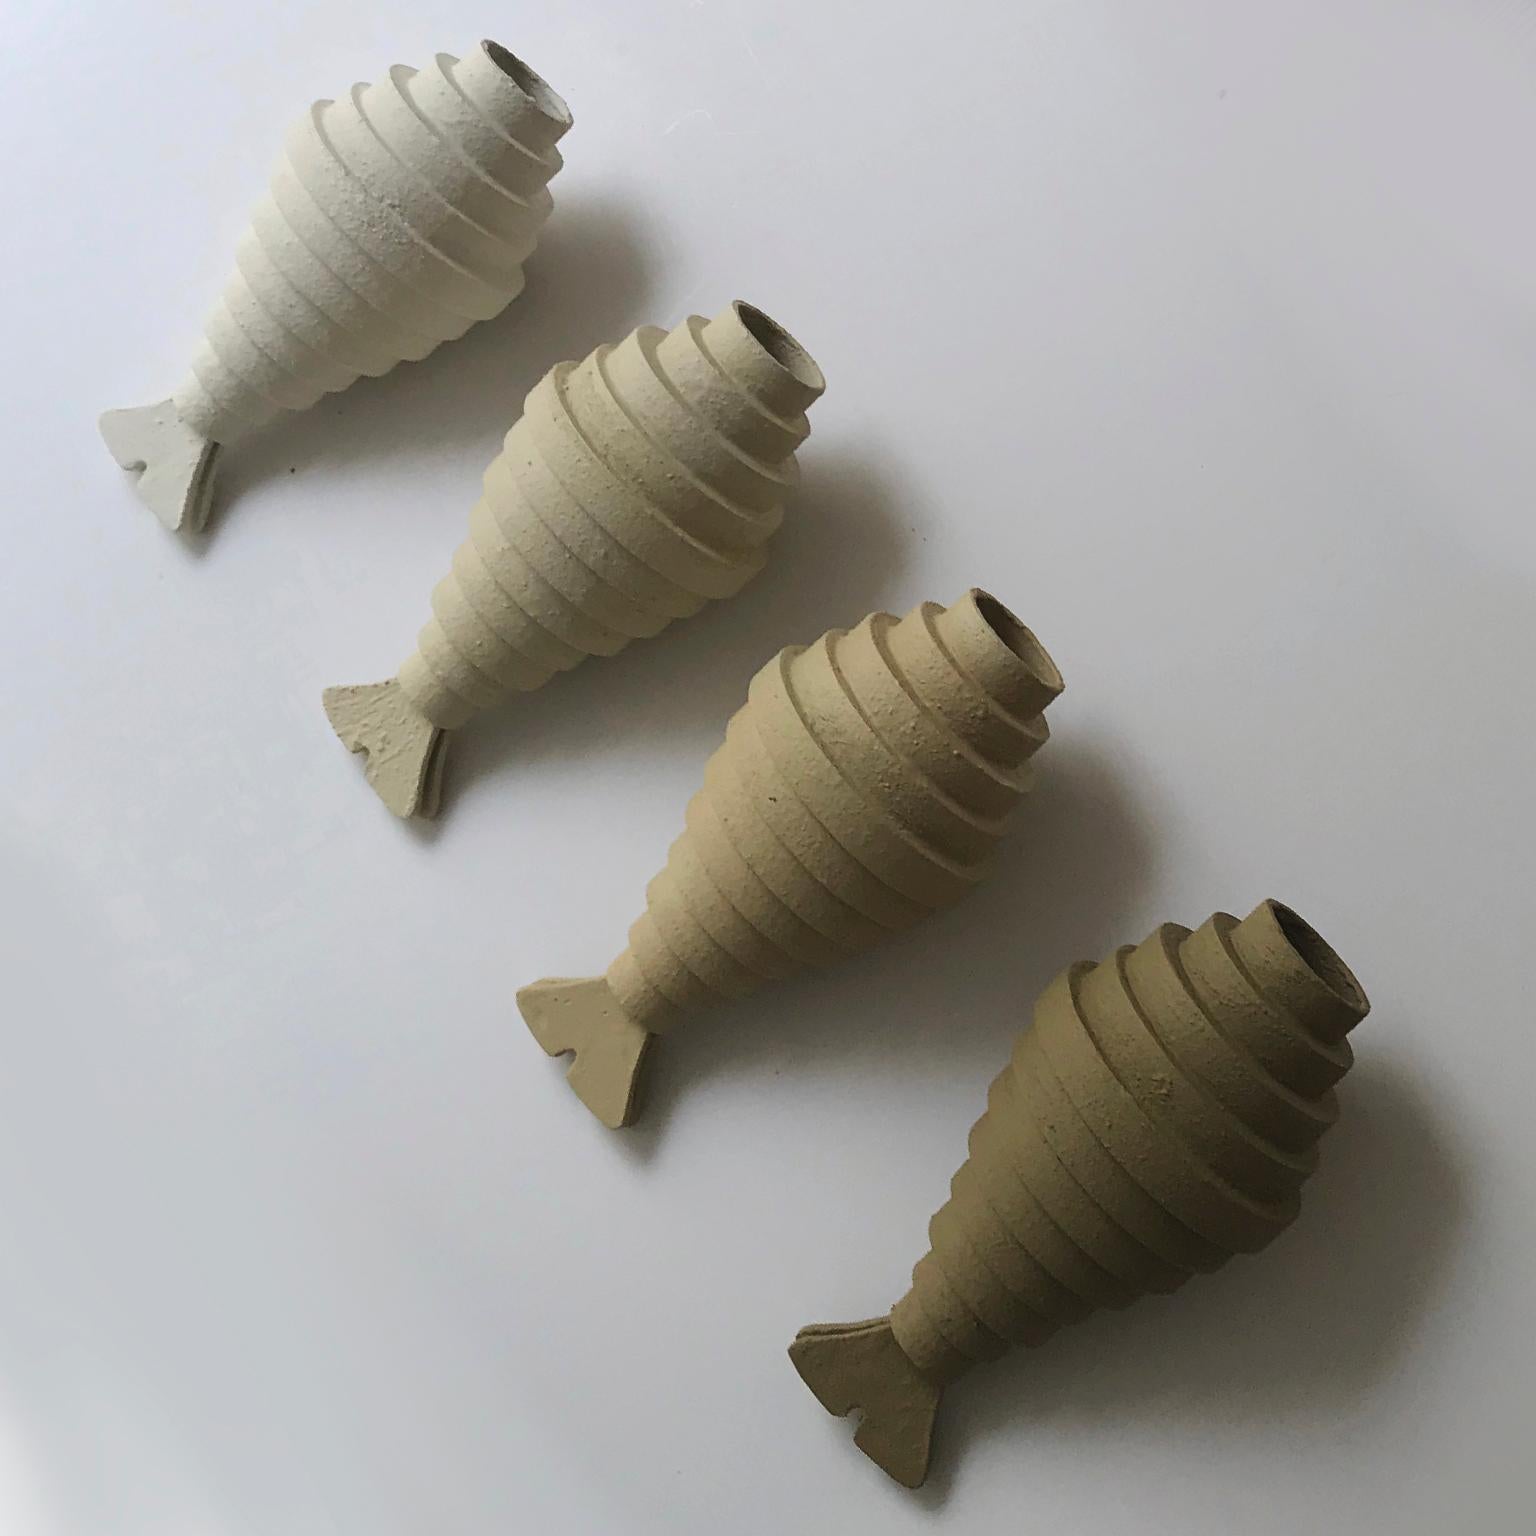 Modern Beach Sculpture Ideal For Walls    Abstract School of Fish Formations  For Sale 14